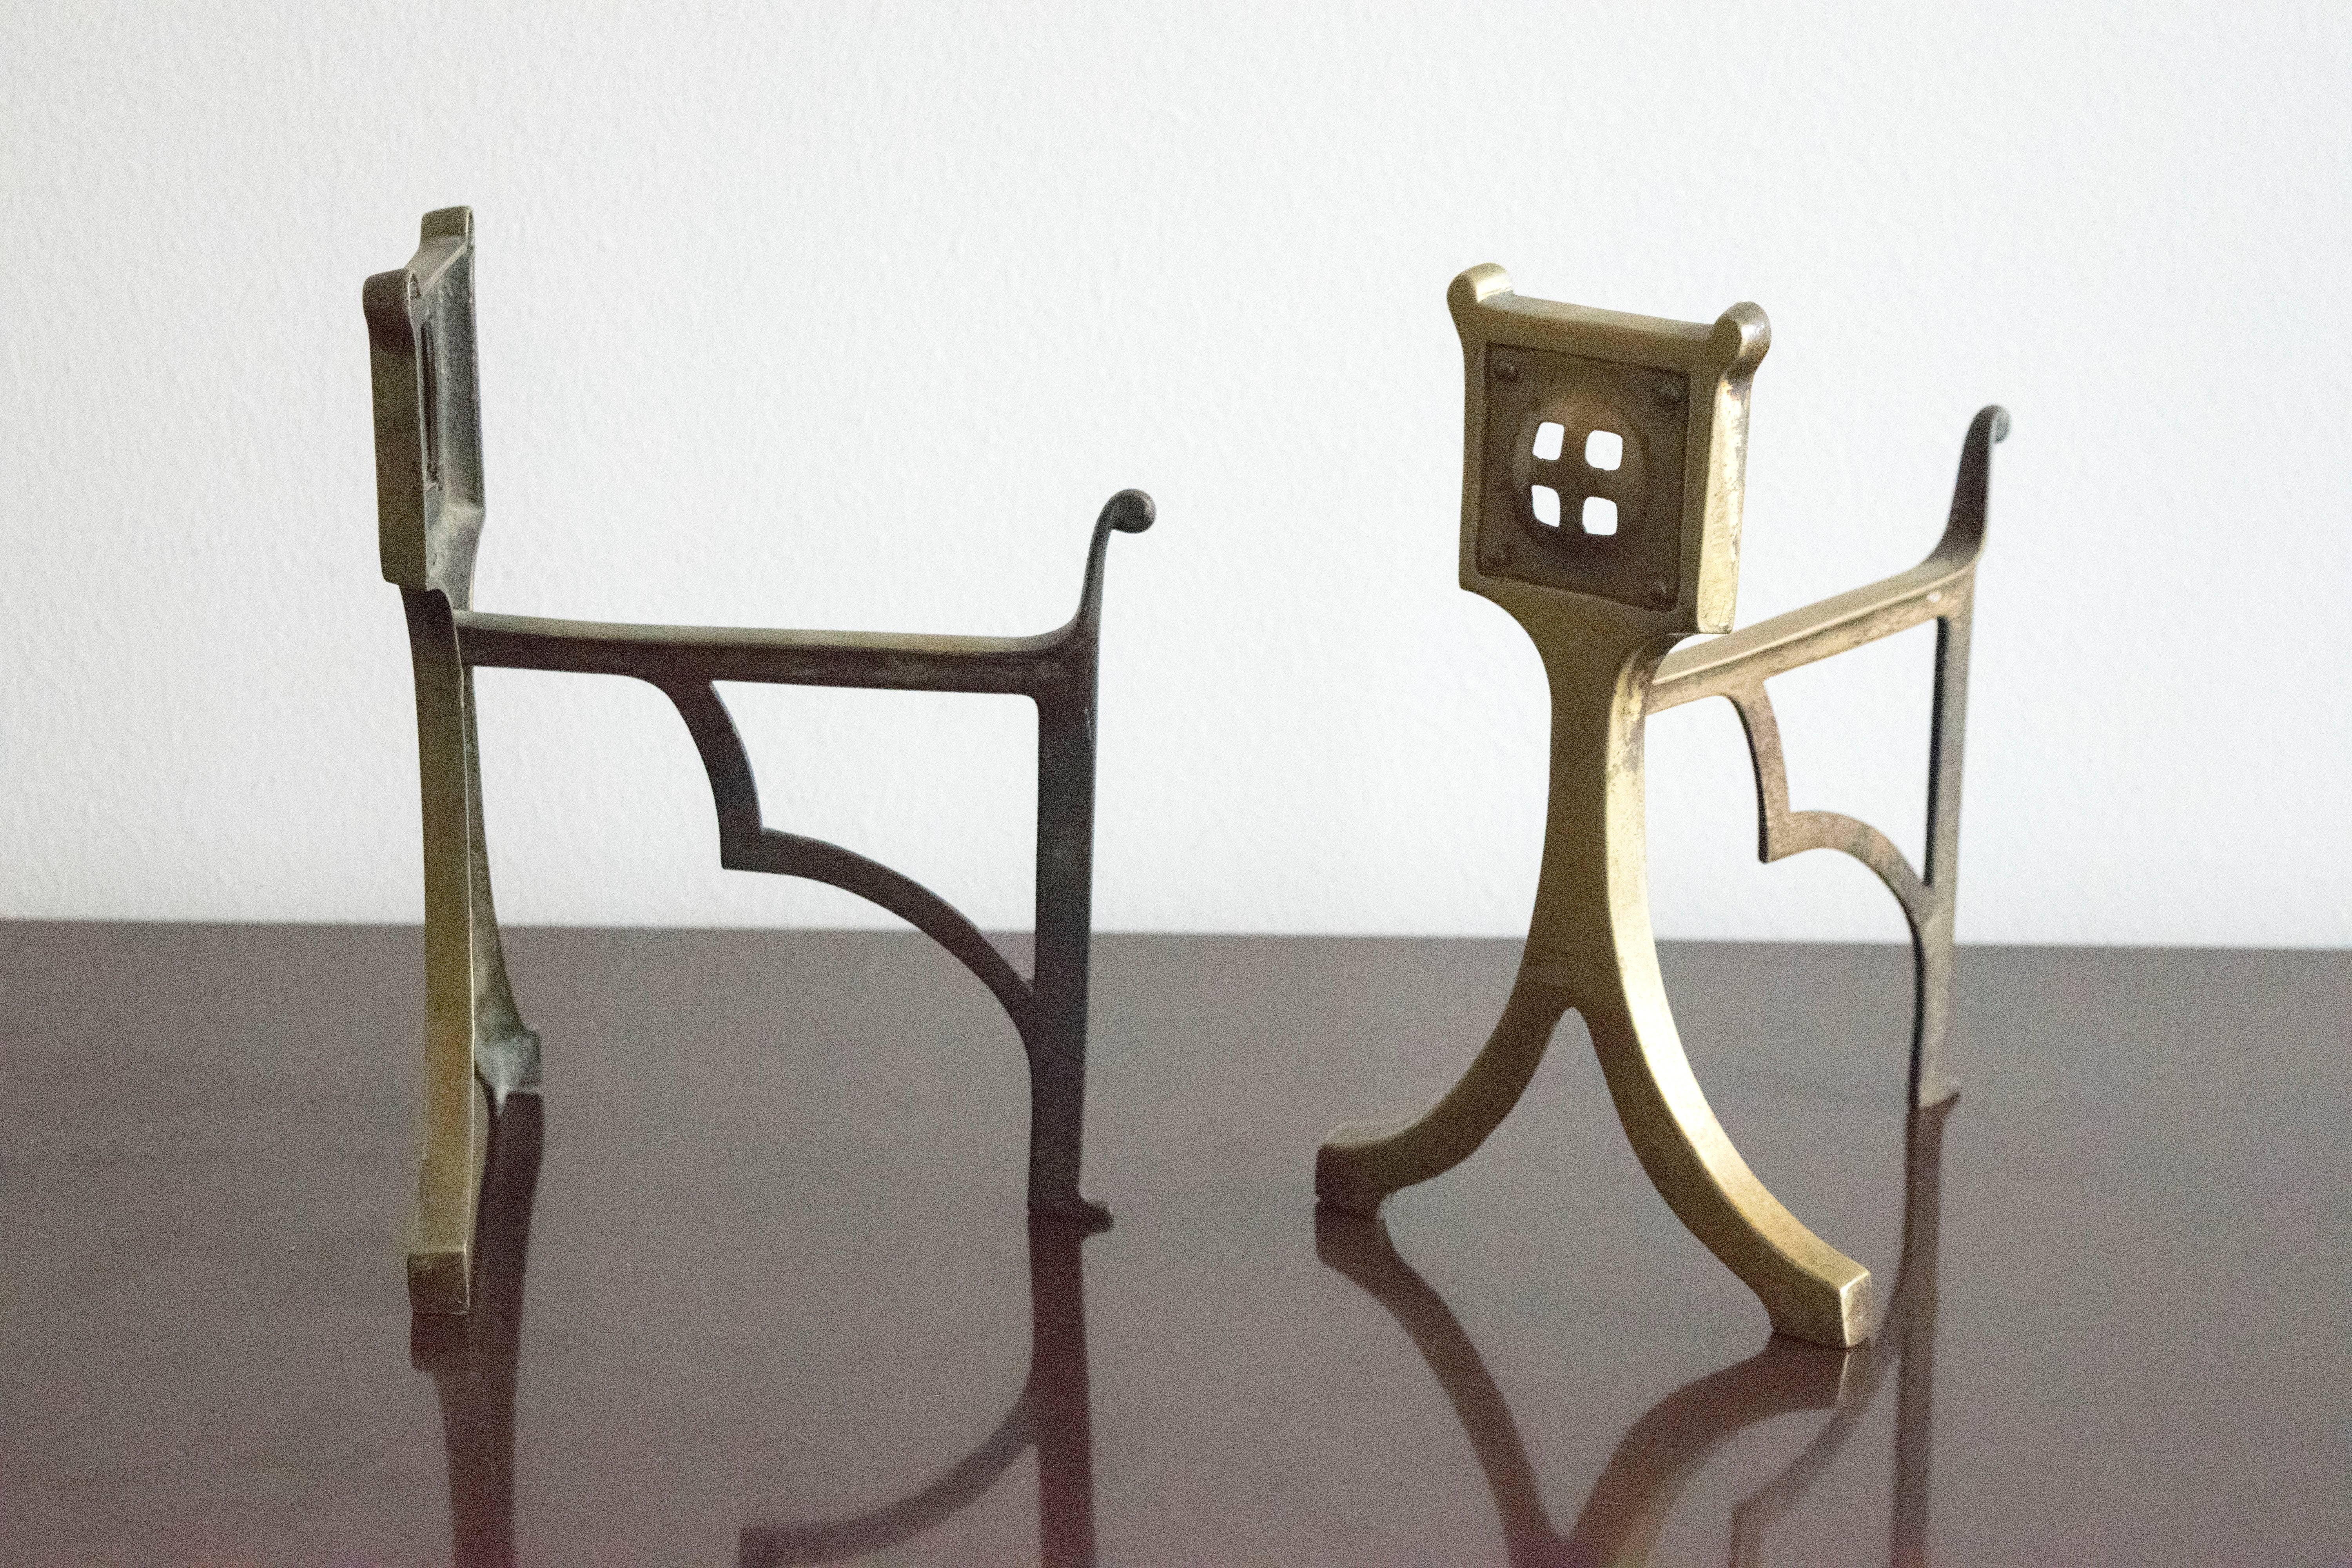 Highly unusual pair of small brass Art Nouveau / Secessionist brass andirons.